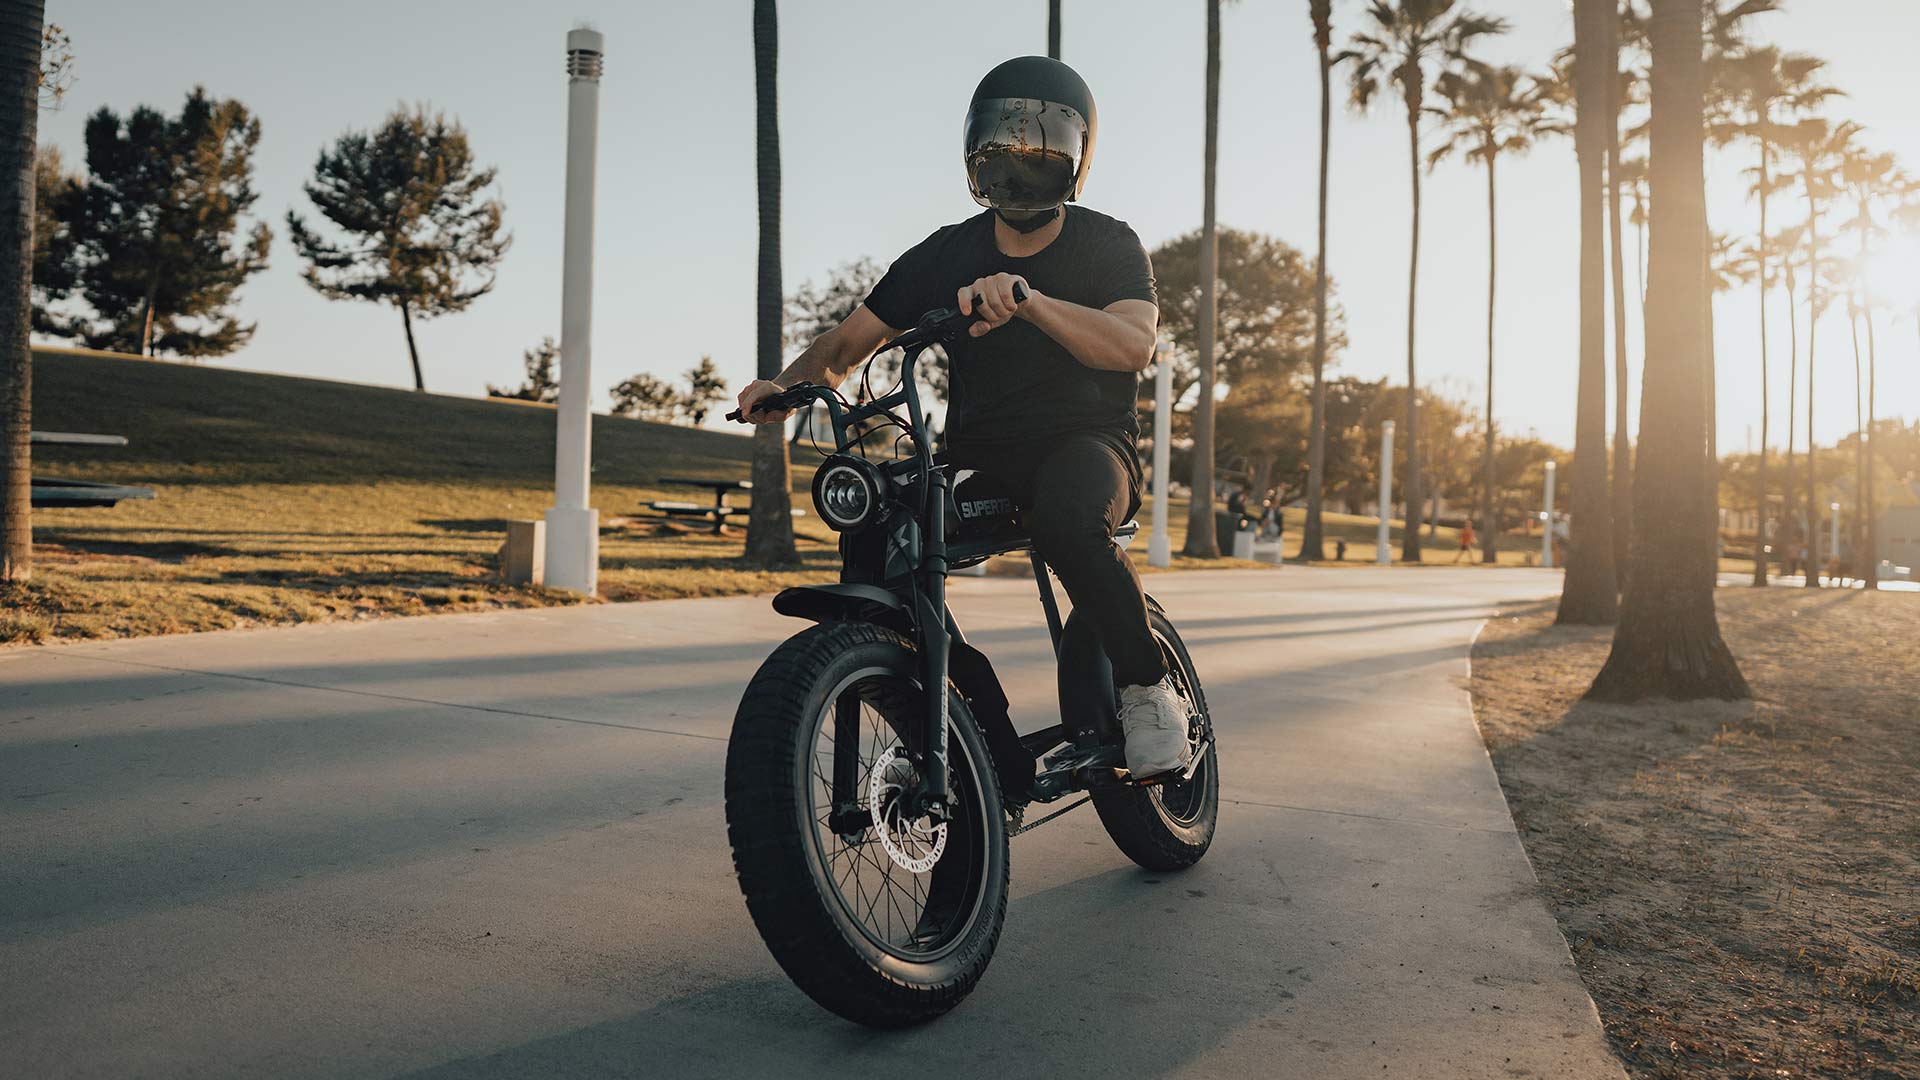 Lifestyle image of a recent grad riding his SUPER73 S2 near the beach.